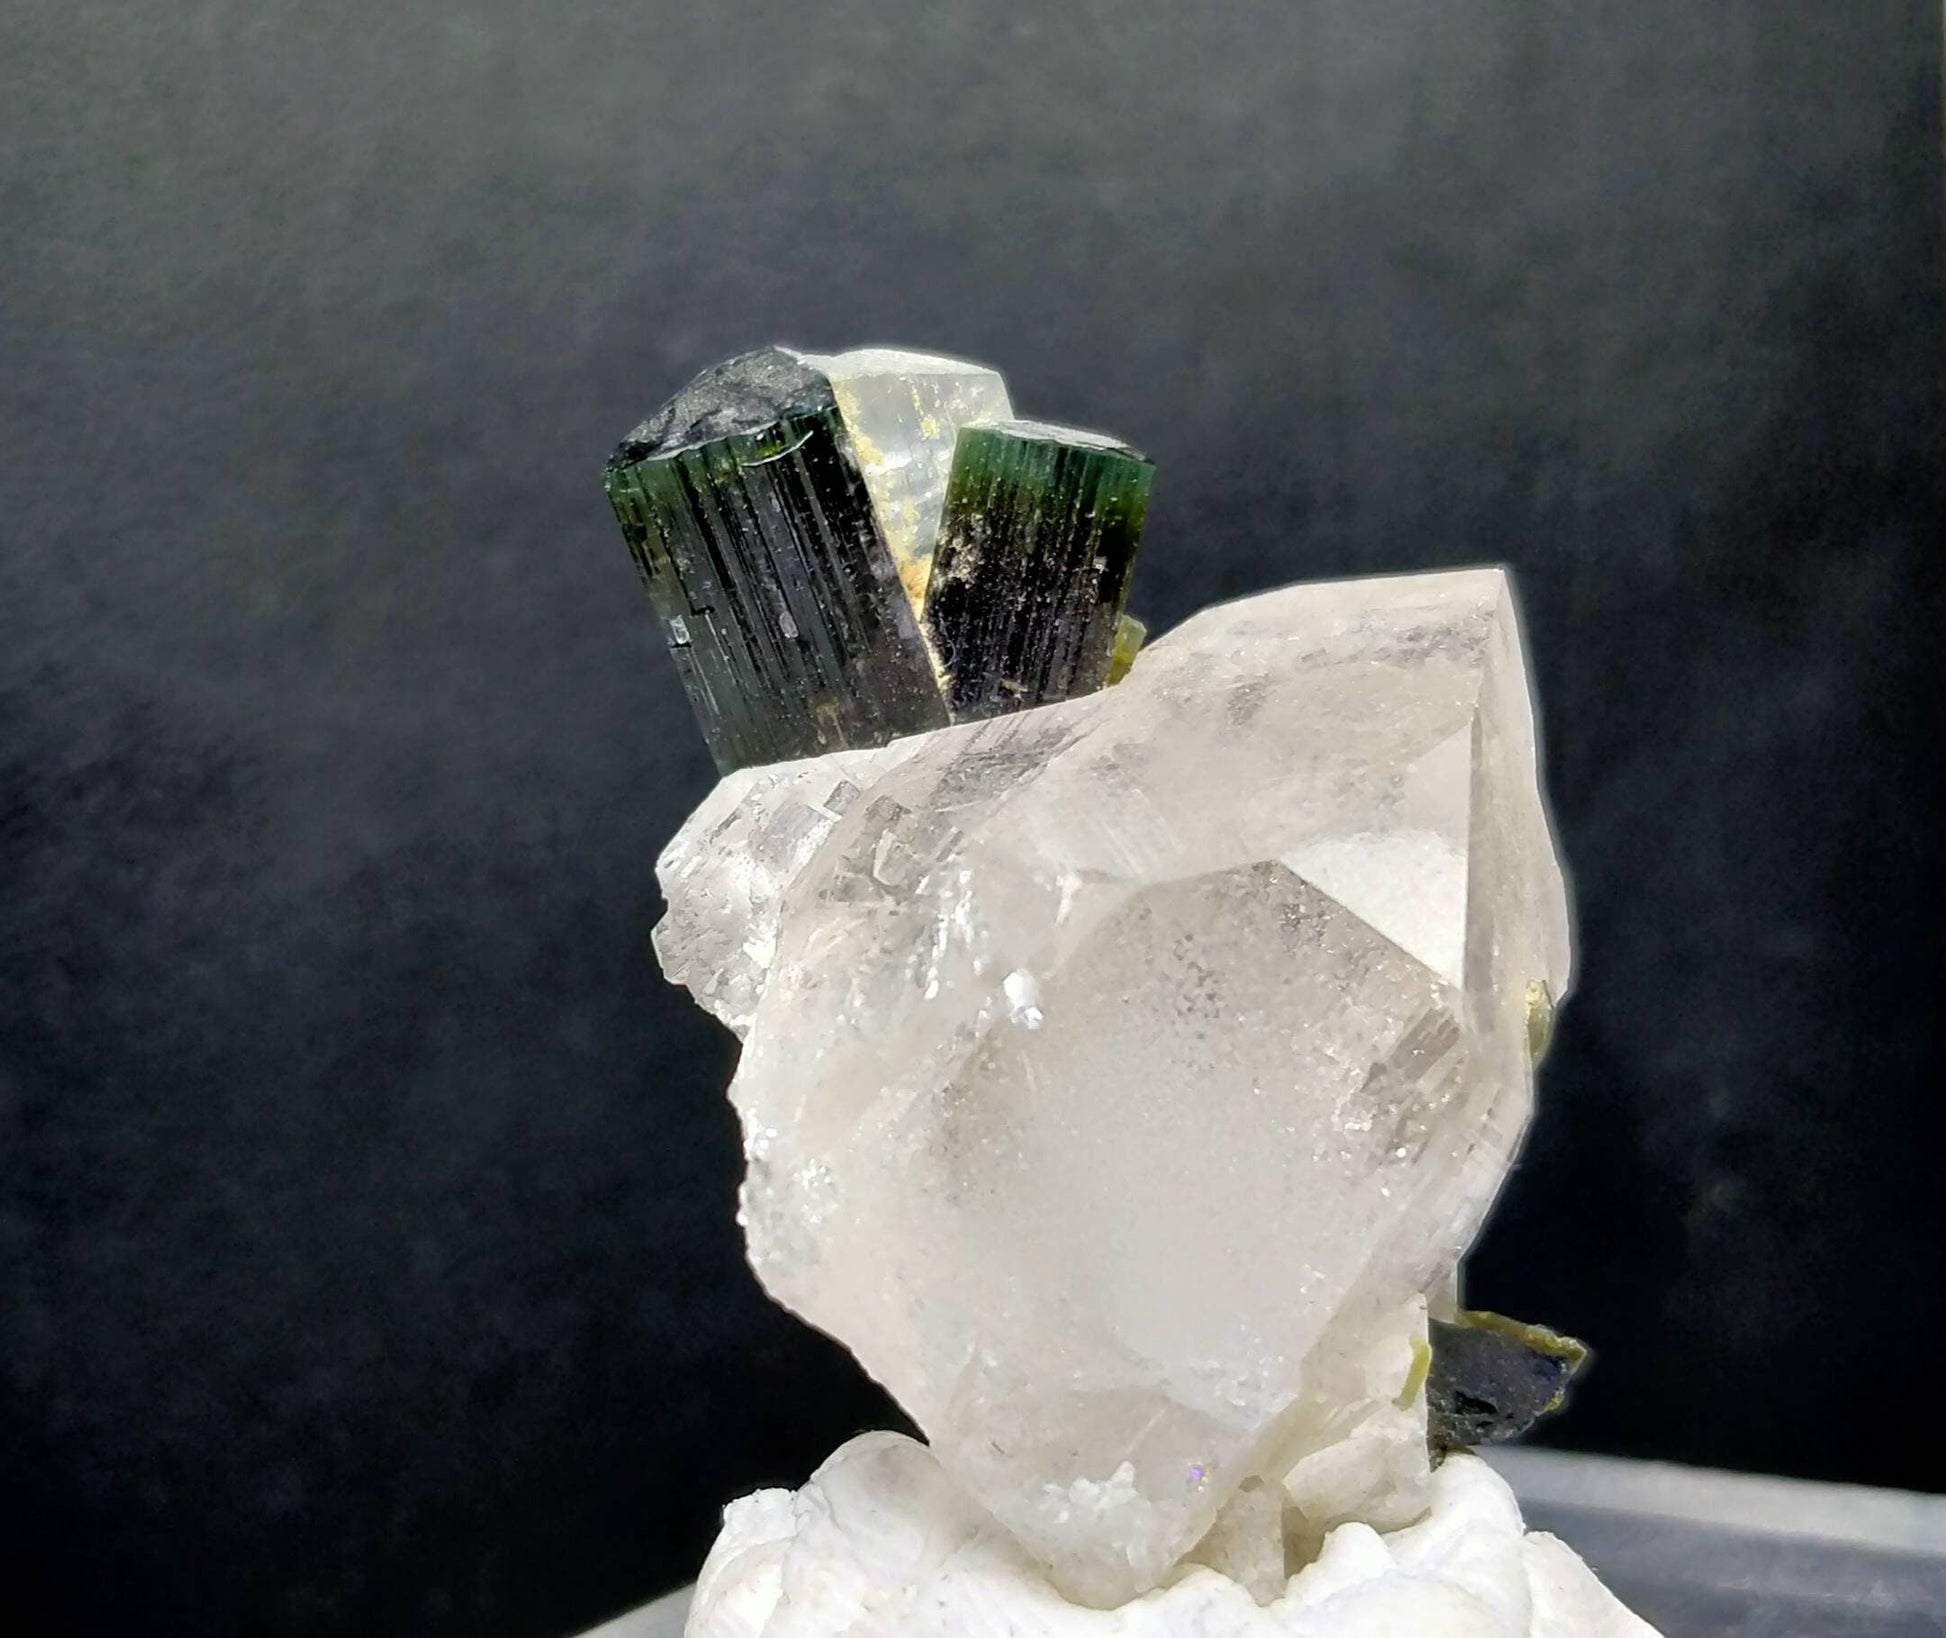 ARSAA GEMS AND MINERALSNatural top quality beautiful 17 grams Green caps tourmaline over smokey quartz crystal - Premium  from ARSAA GEMS AND MINERALS - Just $60.00! Shop now at ARSAA GEMS AND MINERALS